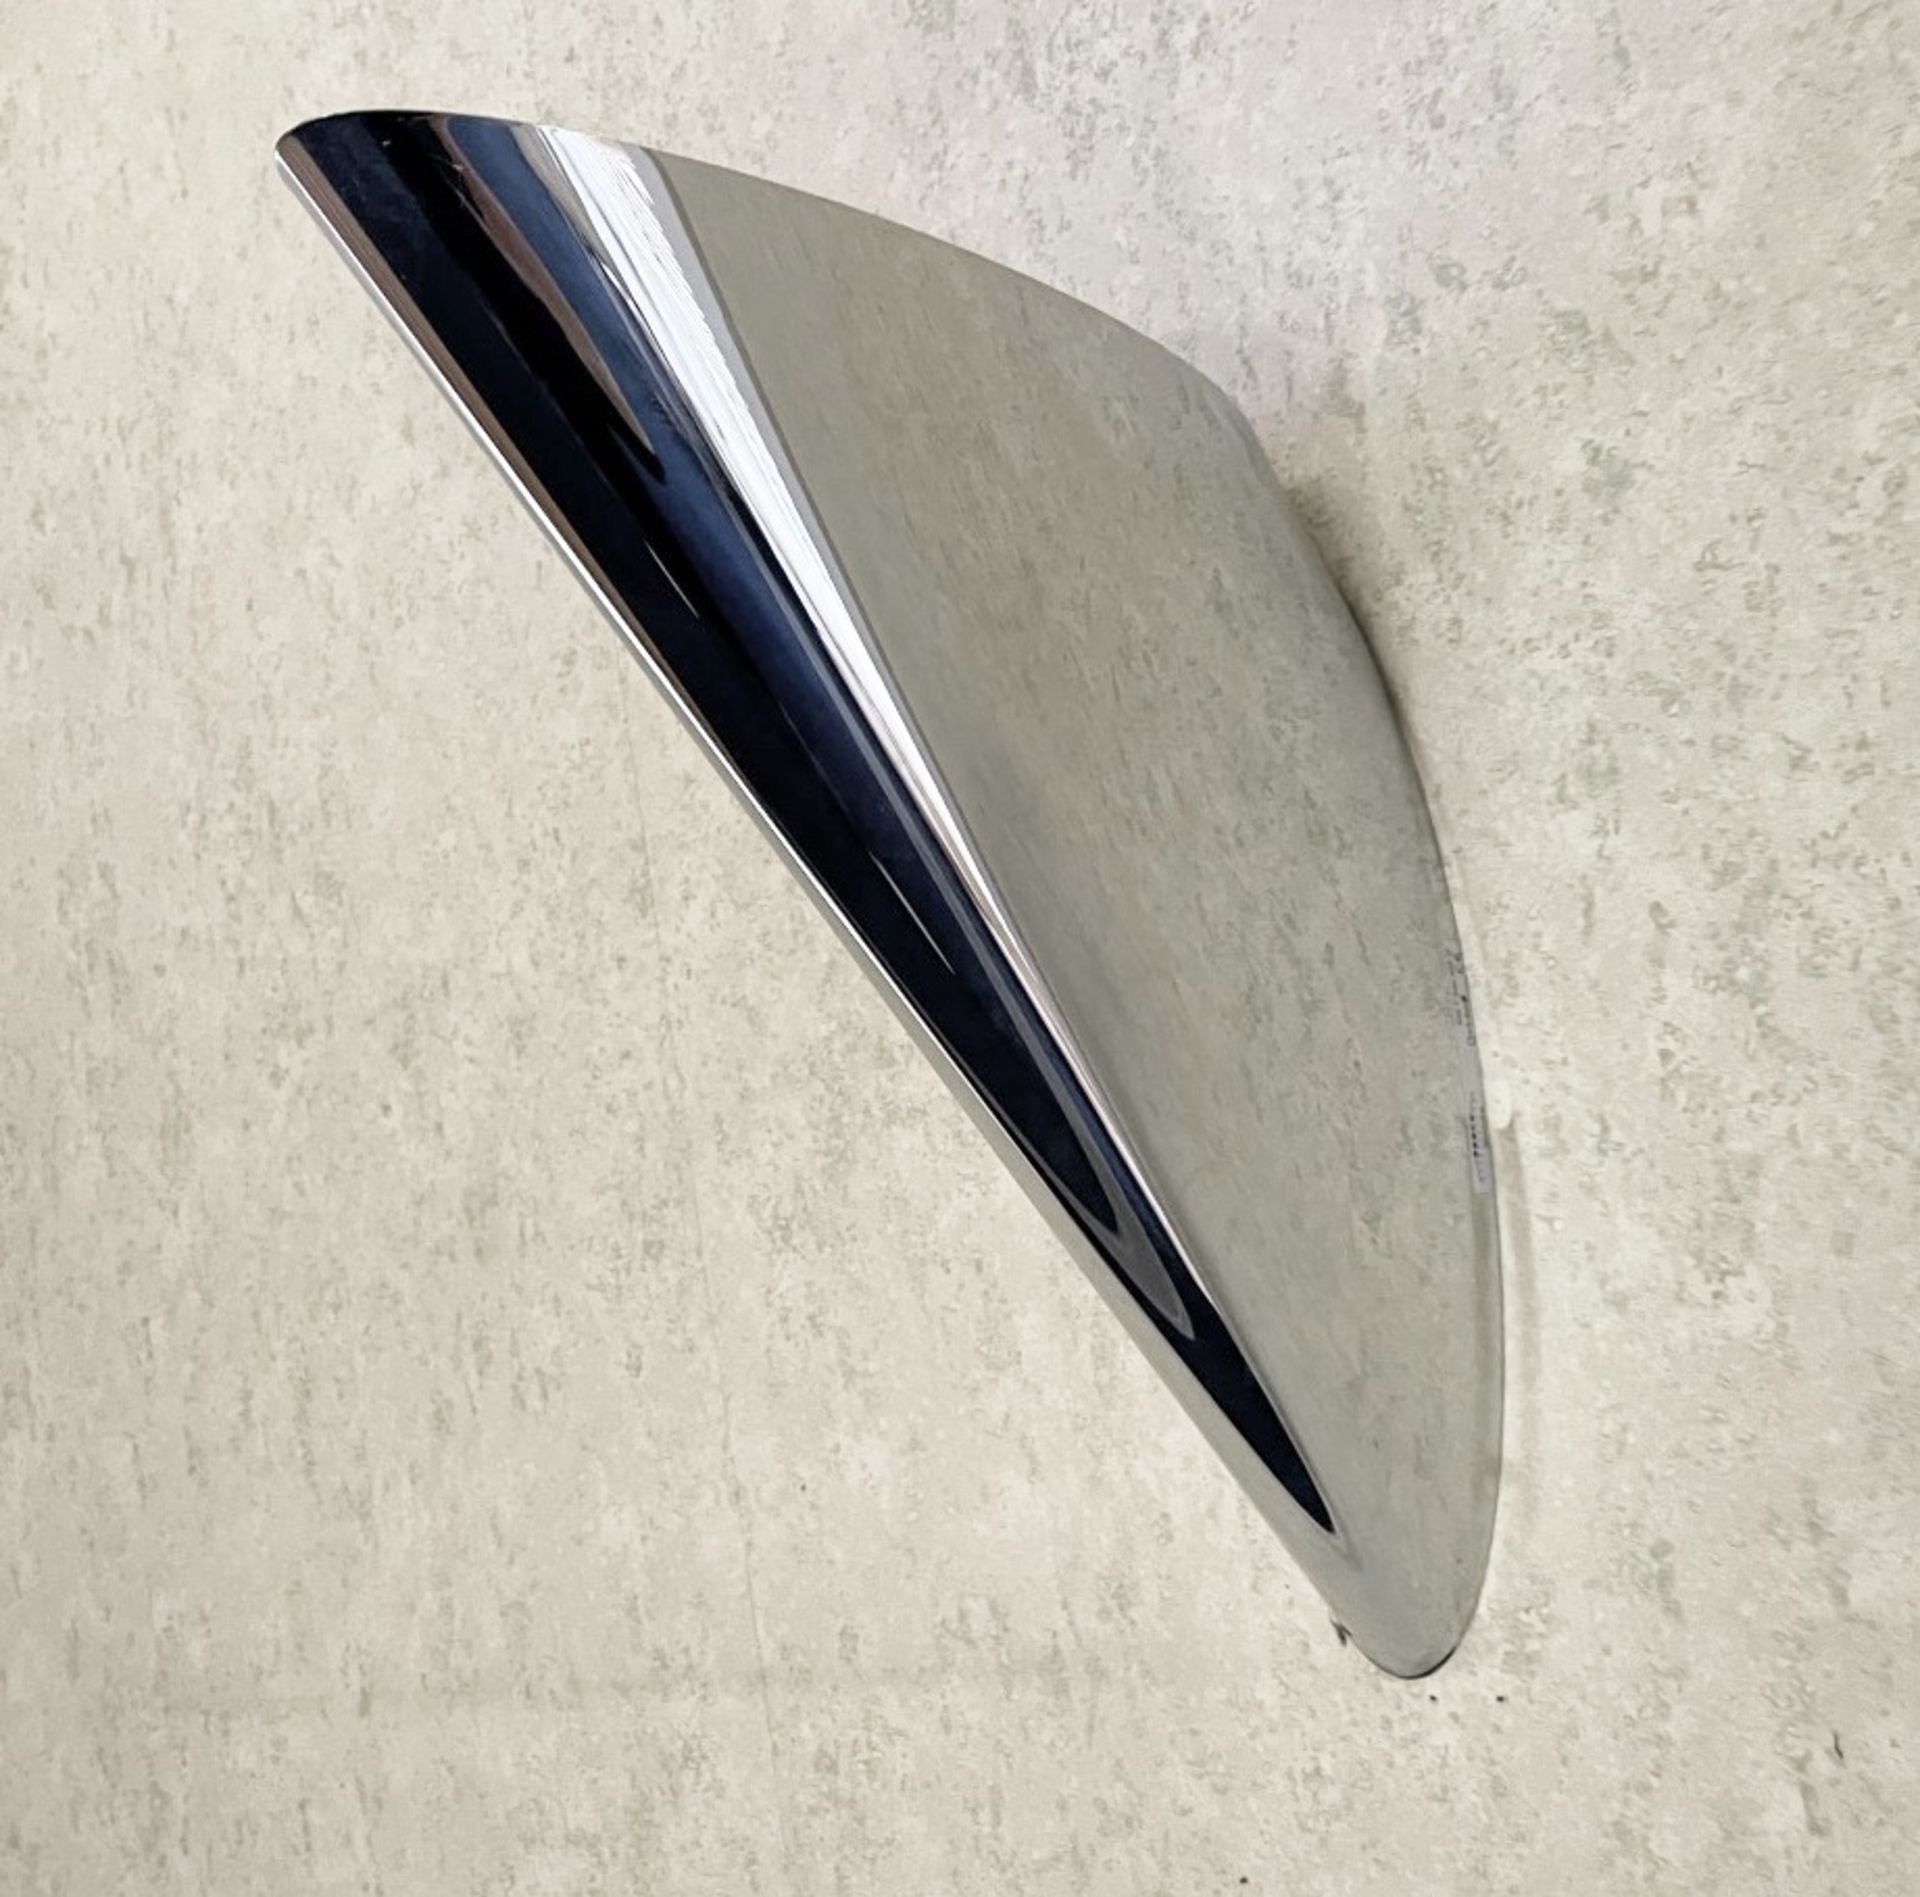 2 x Stylish Triangular Wall Uplighters With A Chrome Finish - Dimensions: 30 x 30cm&nbsp;-&nbs - Image 2 of 3